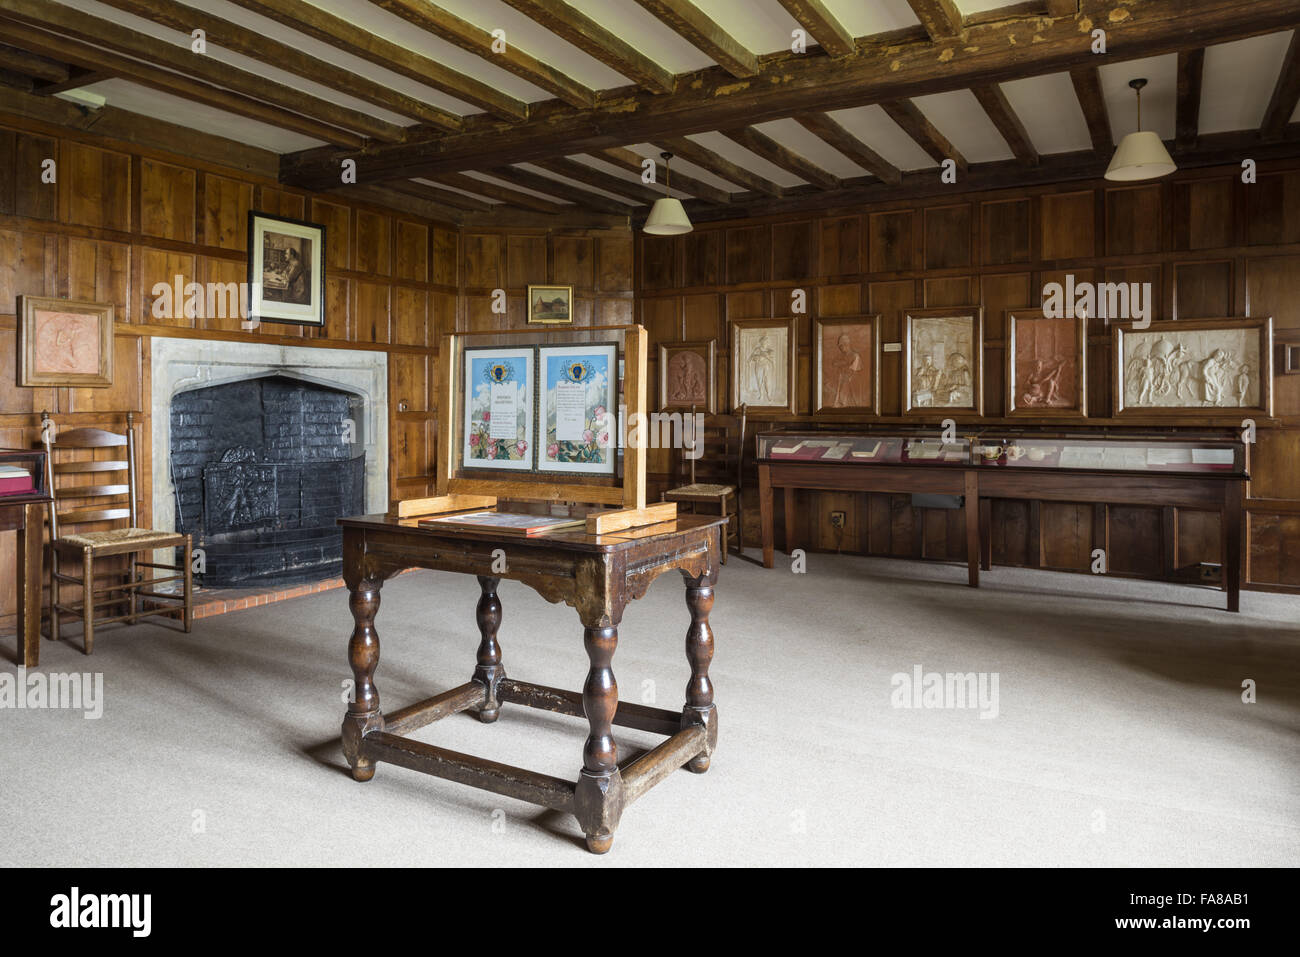 The Exhibition Room at Bateman's, East Sussex. Bateman's was the home of the writer Rudyard Kipling from 1902 to 1936. Stock Photo